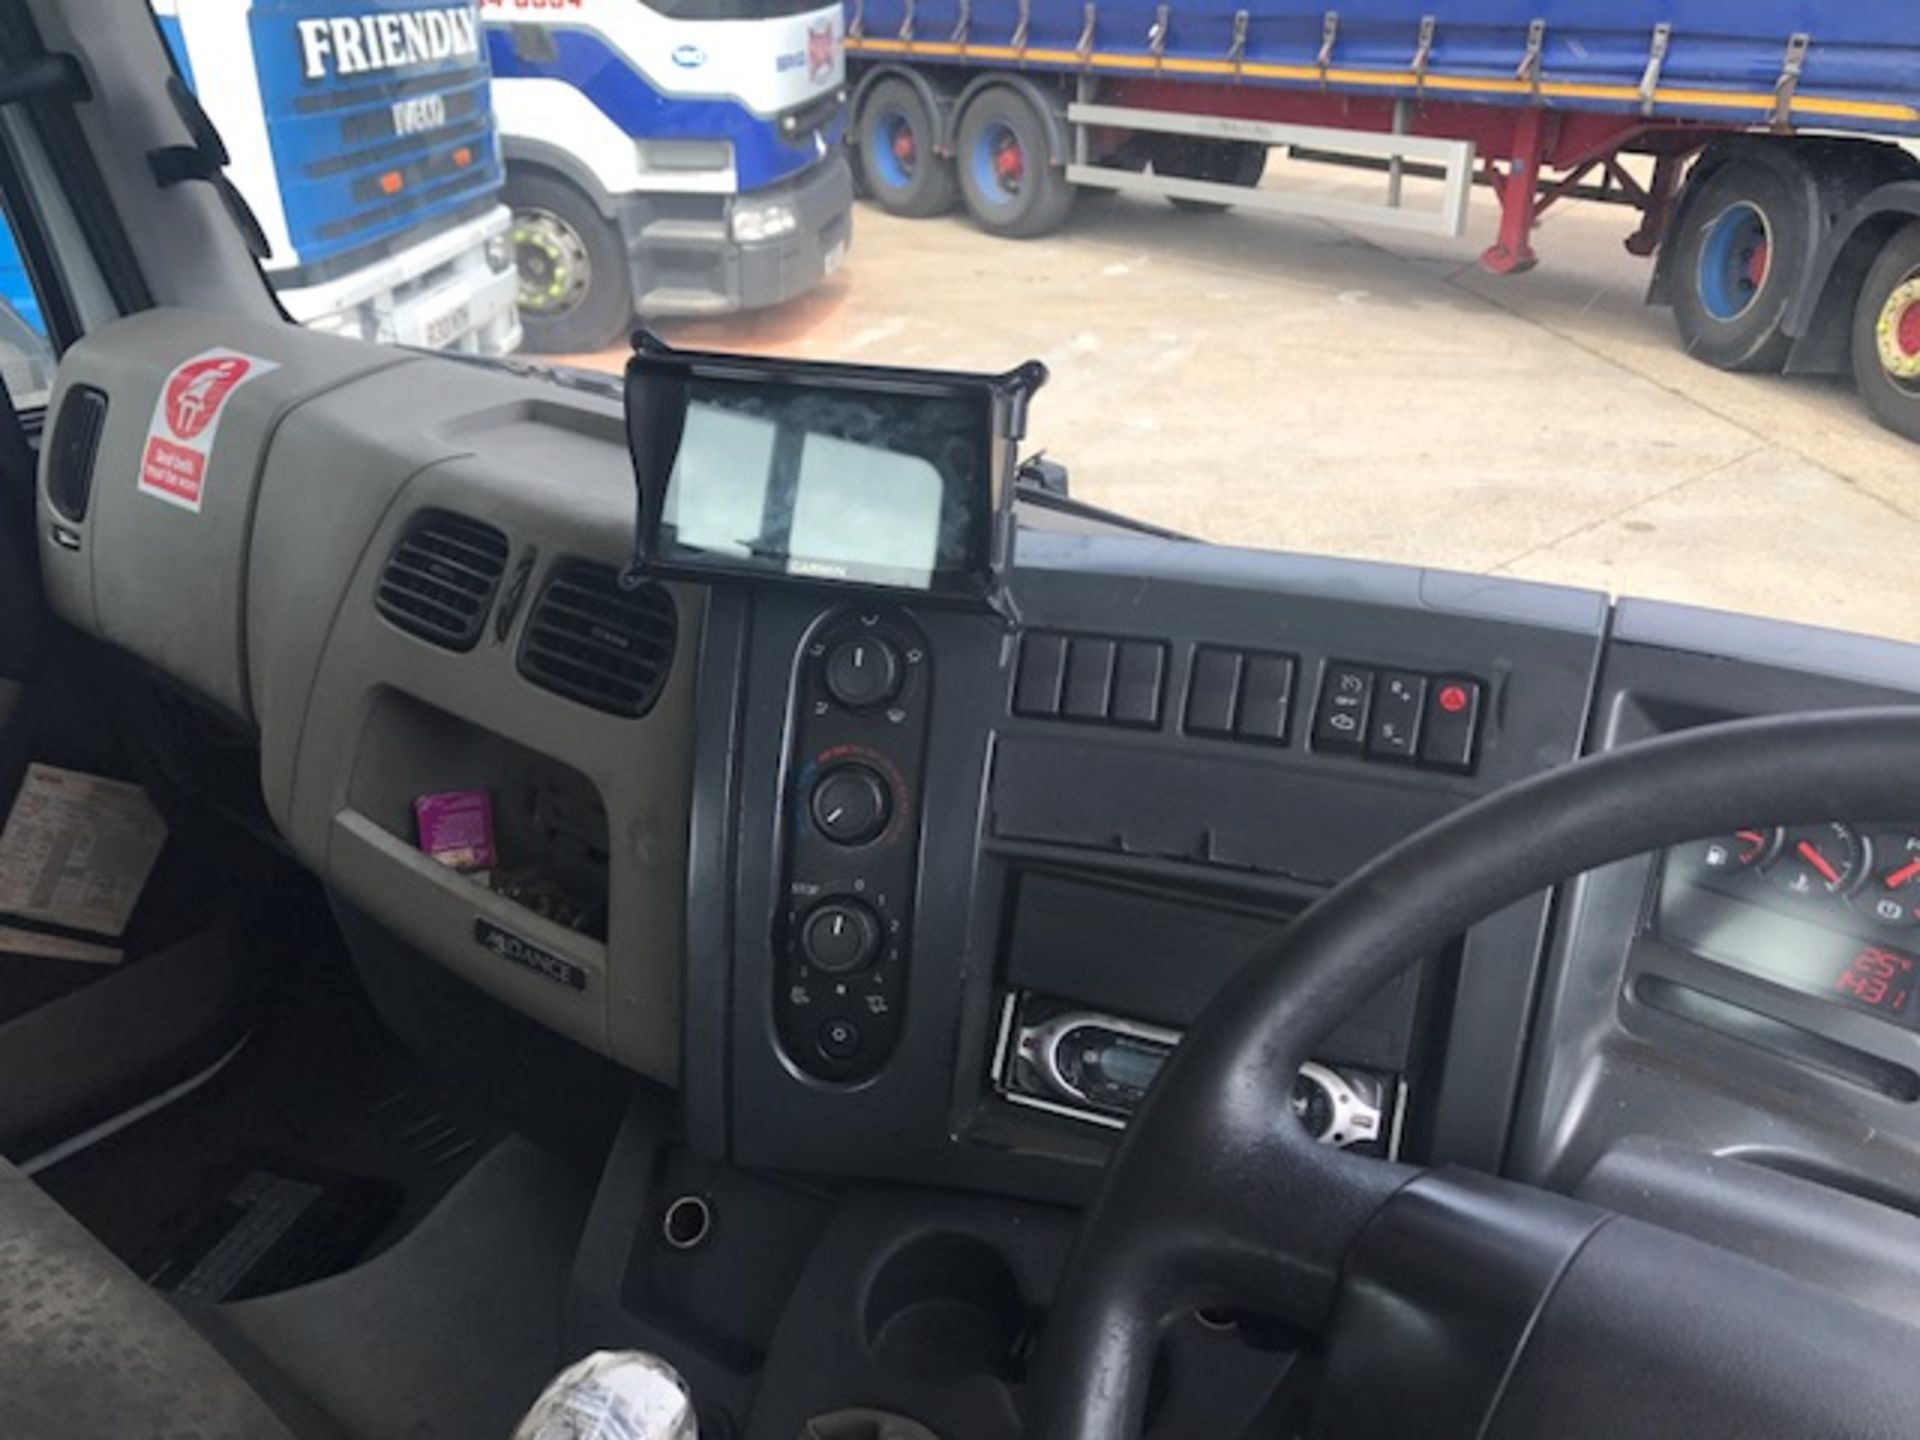 2007 Renault Midlum 10T day cab breakdown recovery vehicle complete with built in Garmin satnav with - Image 12 of 15